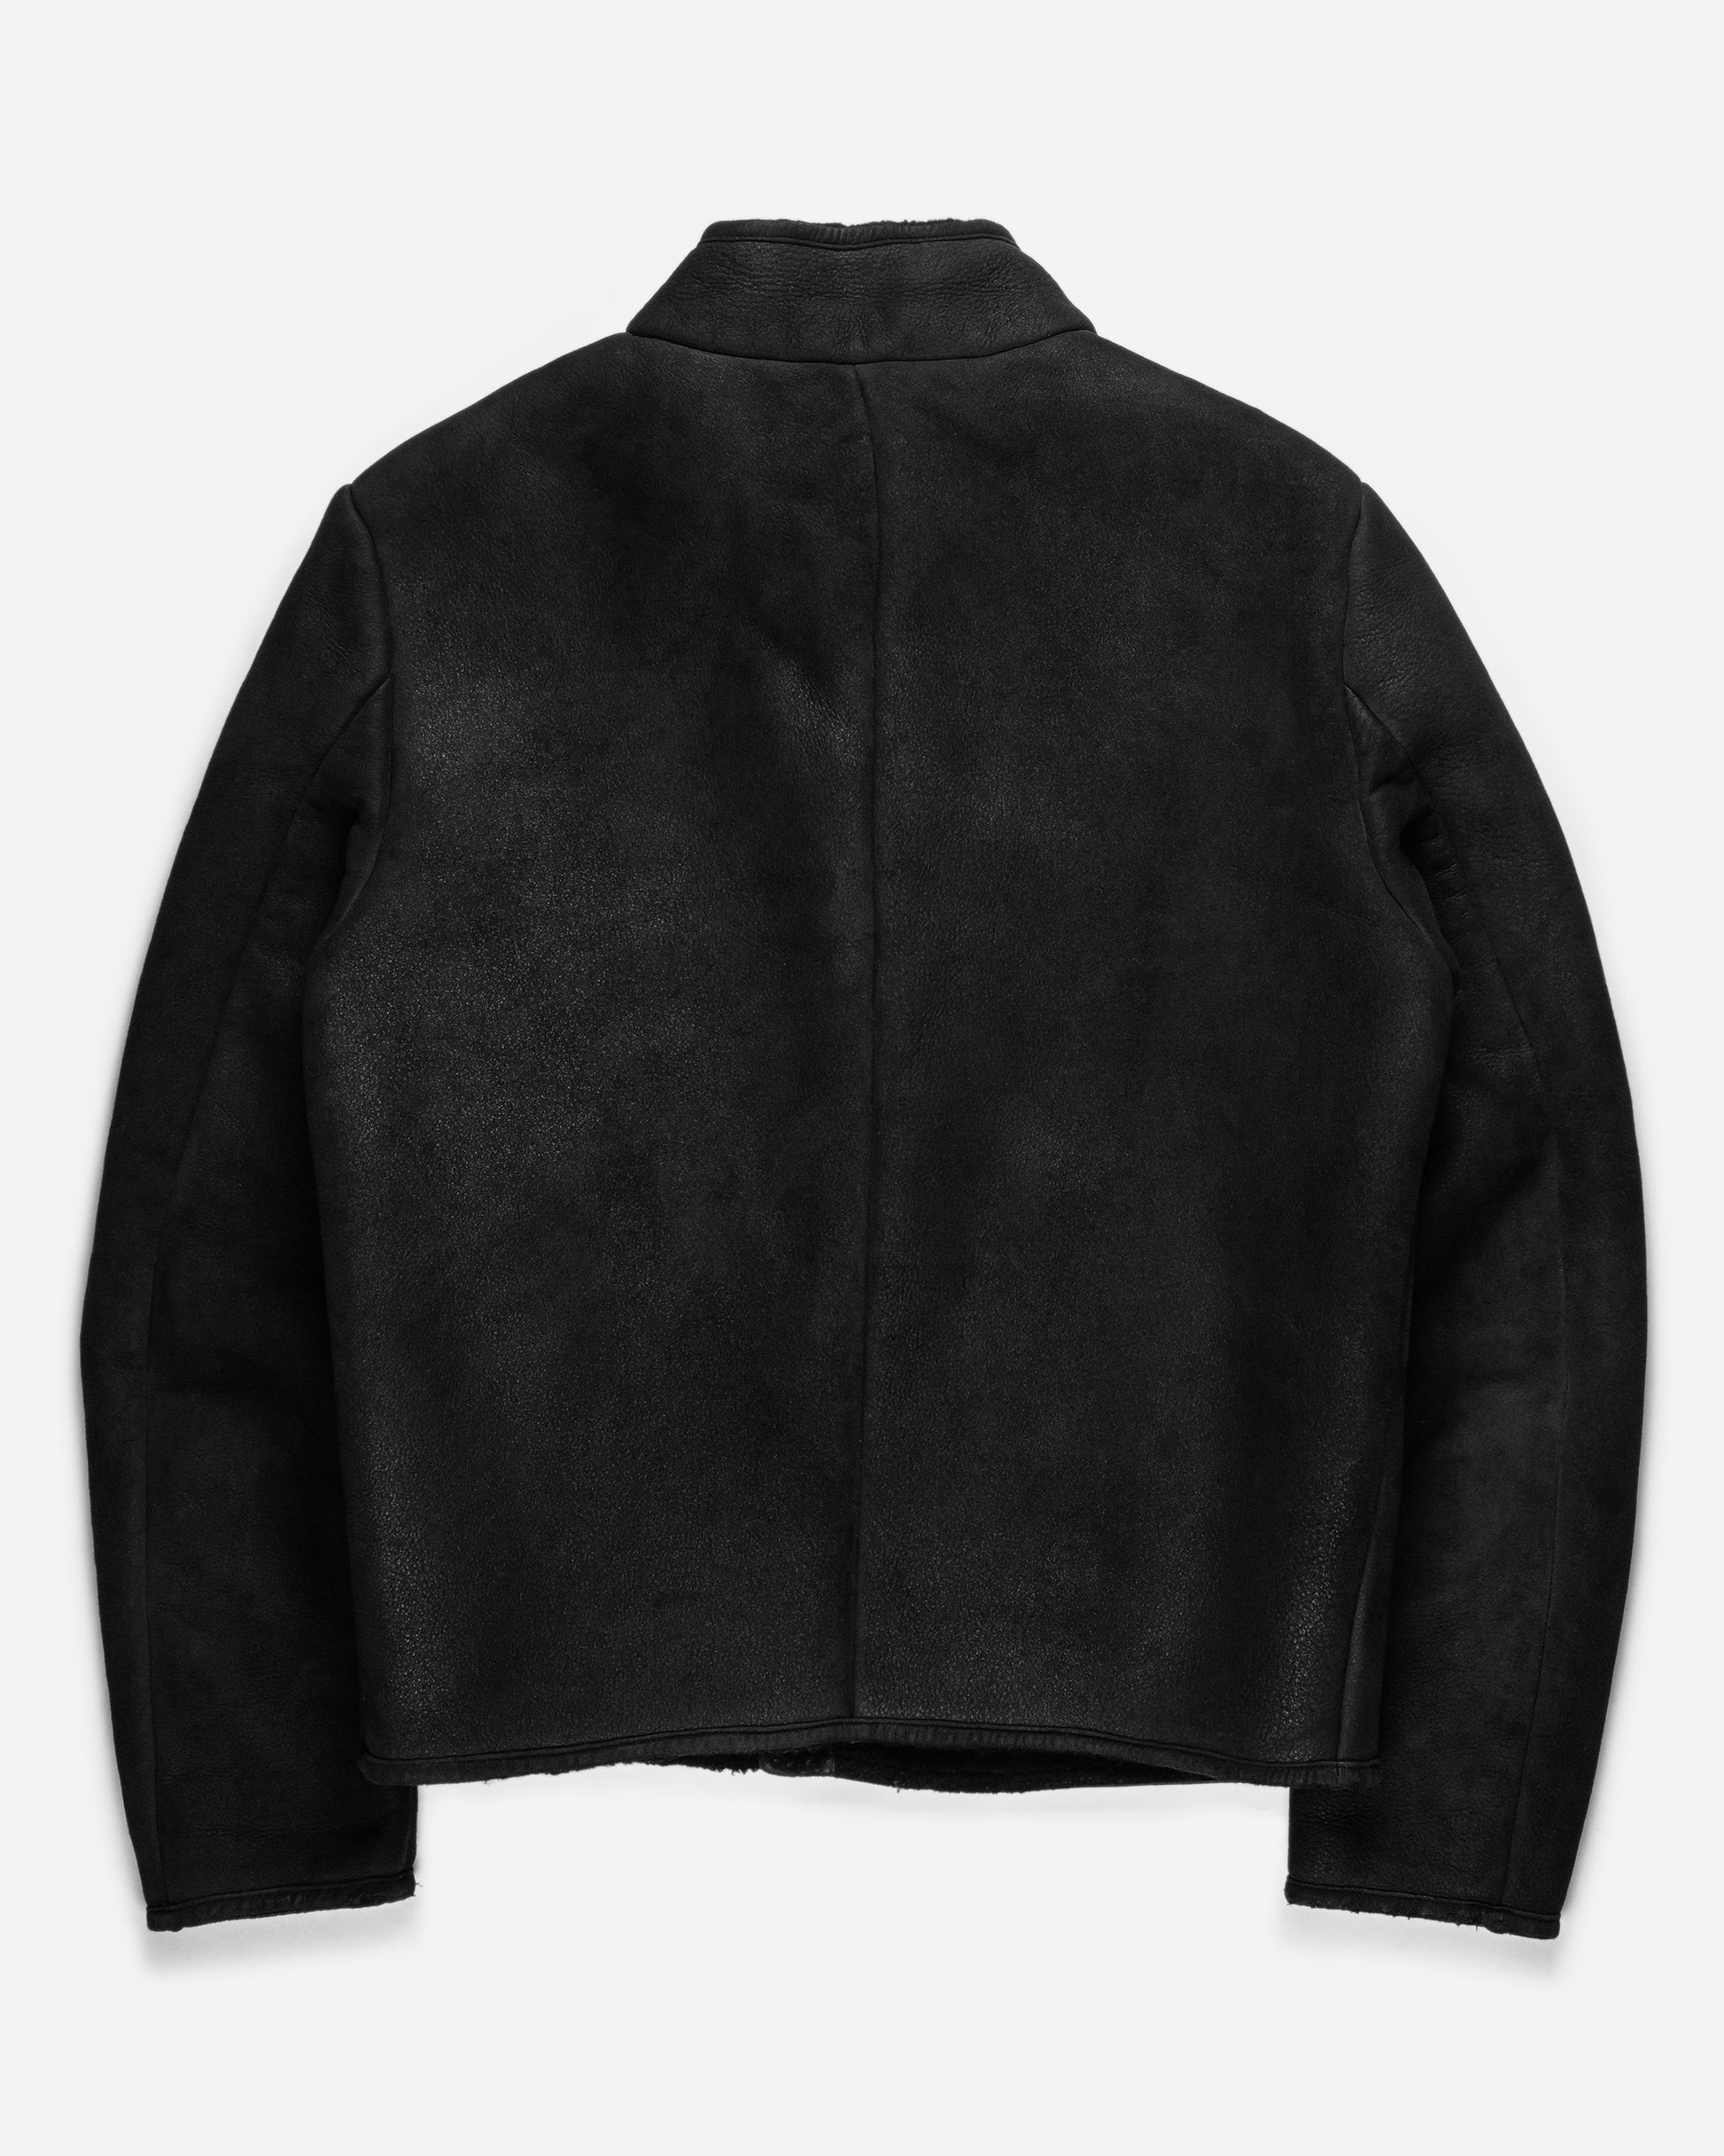 Ruffo Research by Raf Simons Lambskin Leather Jacket - AW99 - SILVER LEAGUE